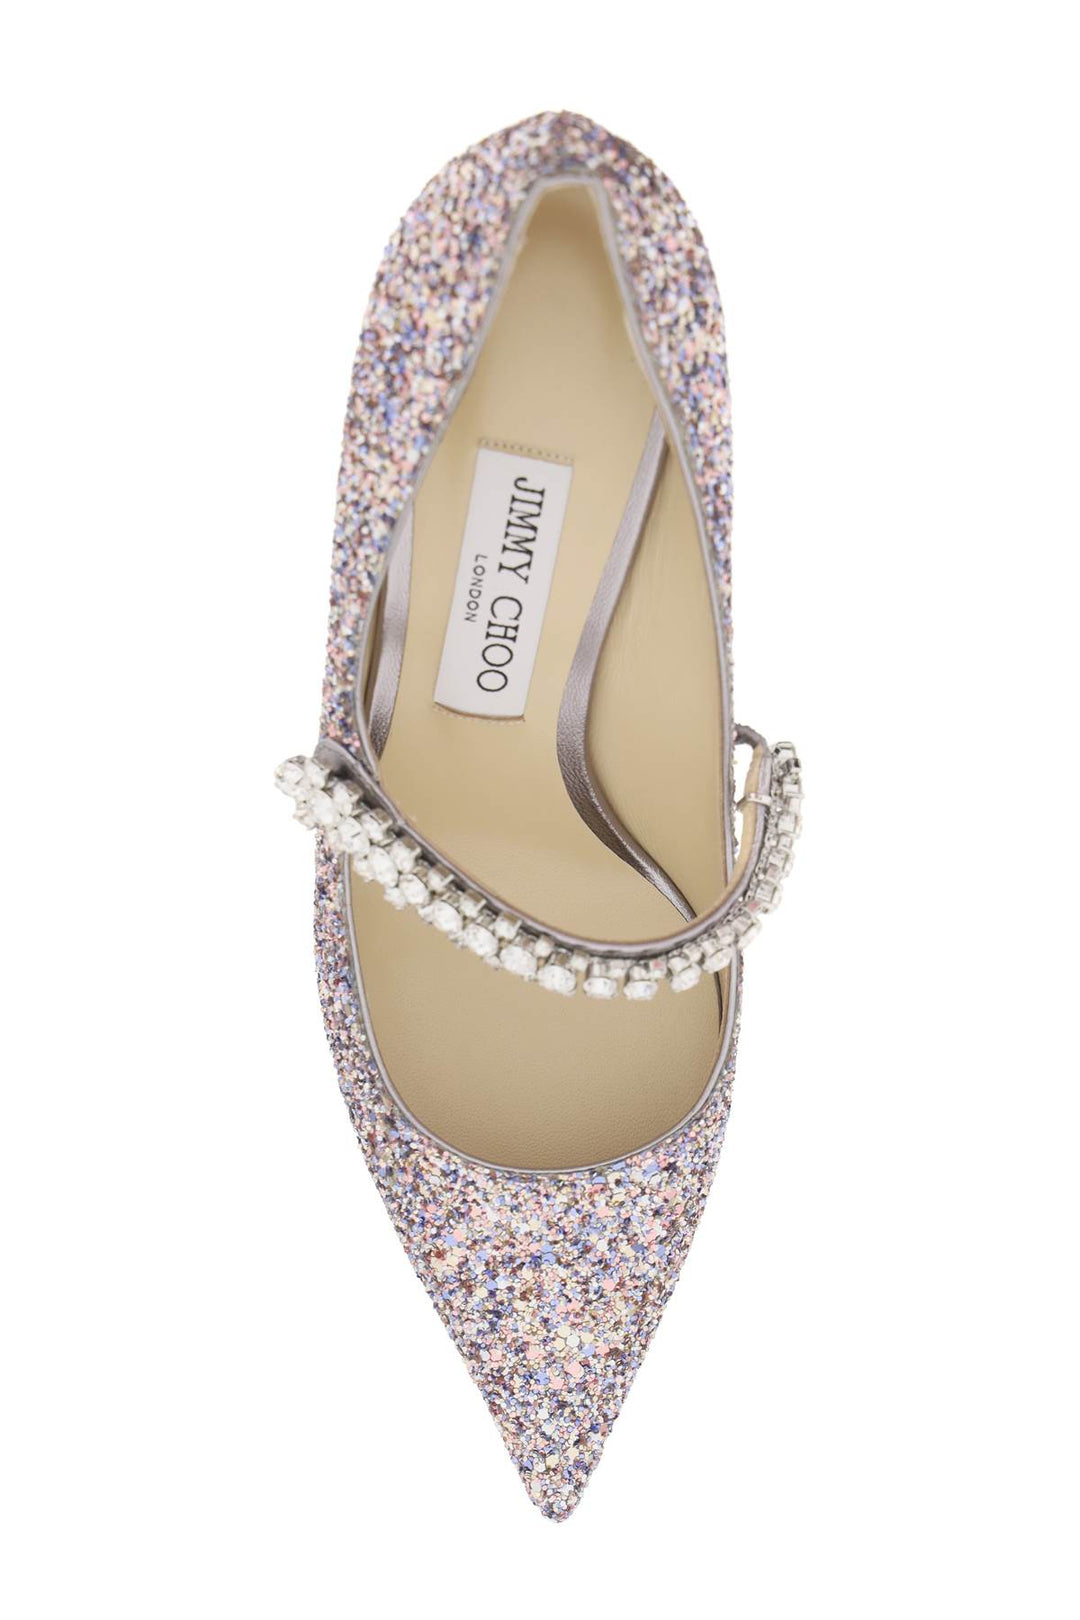 Jimmy Choo Bing 65 Pumps With Glitter And Crystals   Rosa